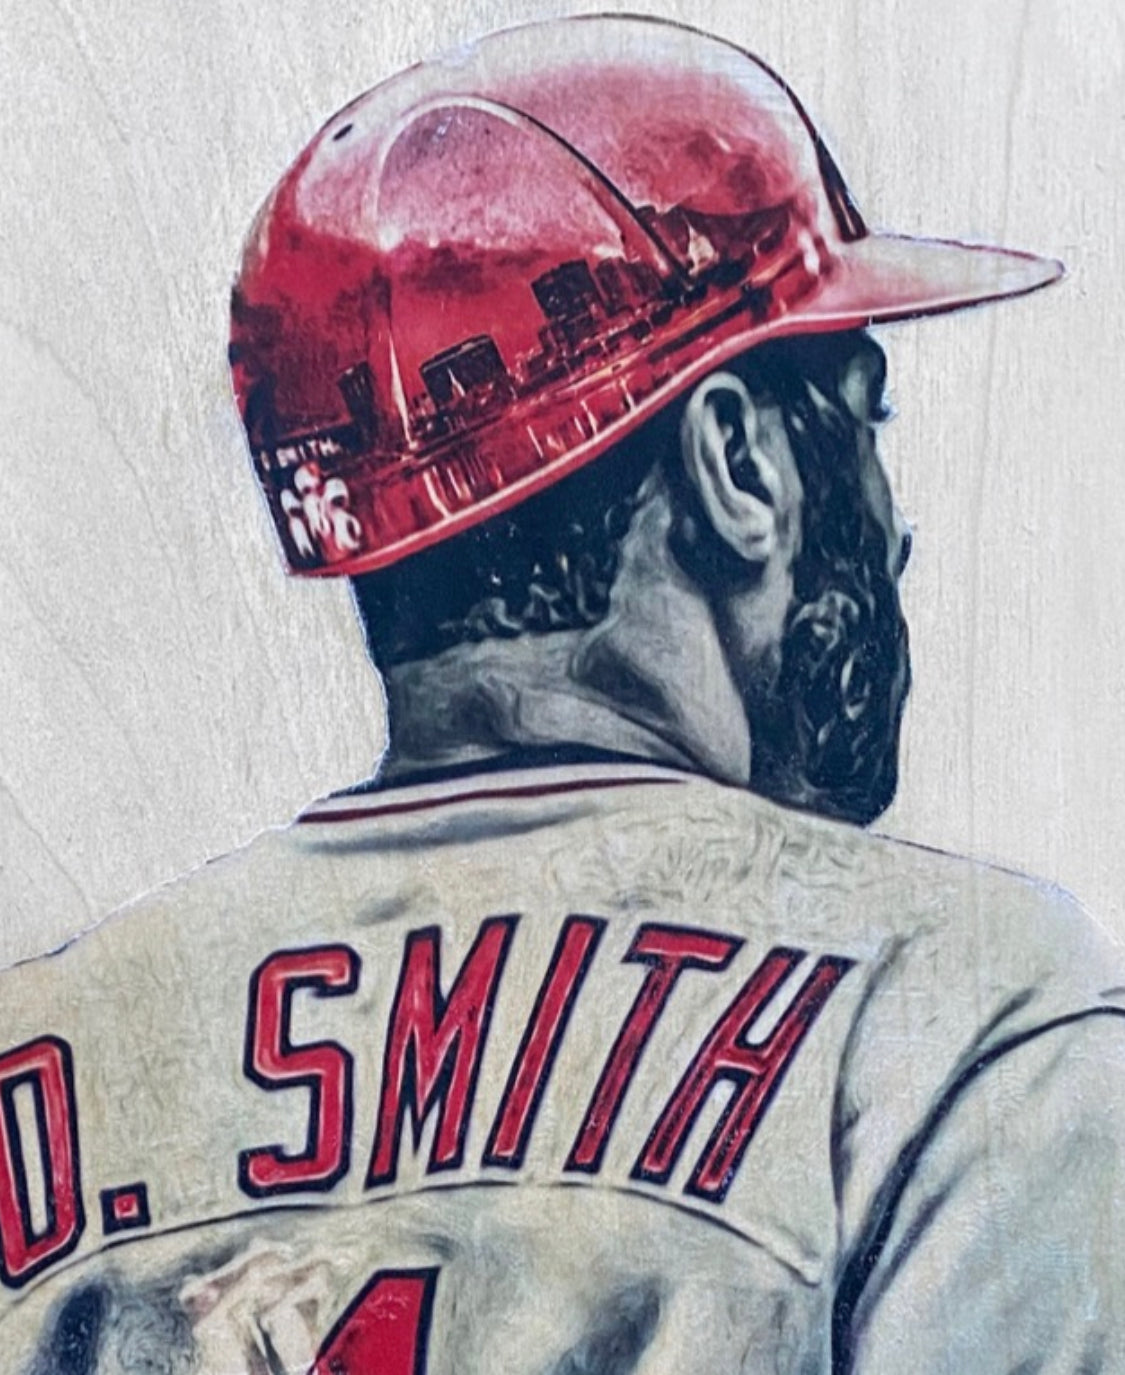 "The Wizard" (Ozzie Smith) St. Louis Cardinals - Officially Licensed MLB Cooperstown Collection Print - Limited Release